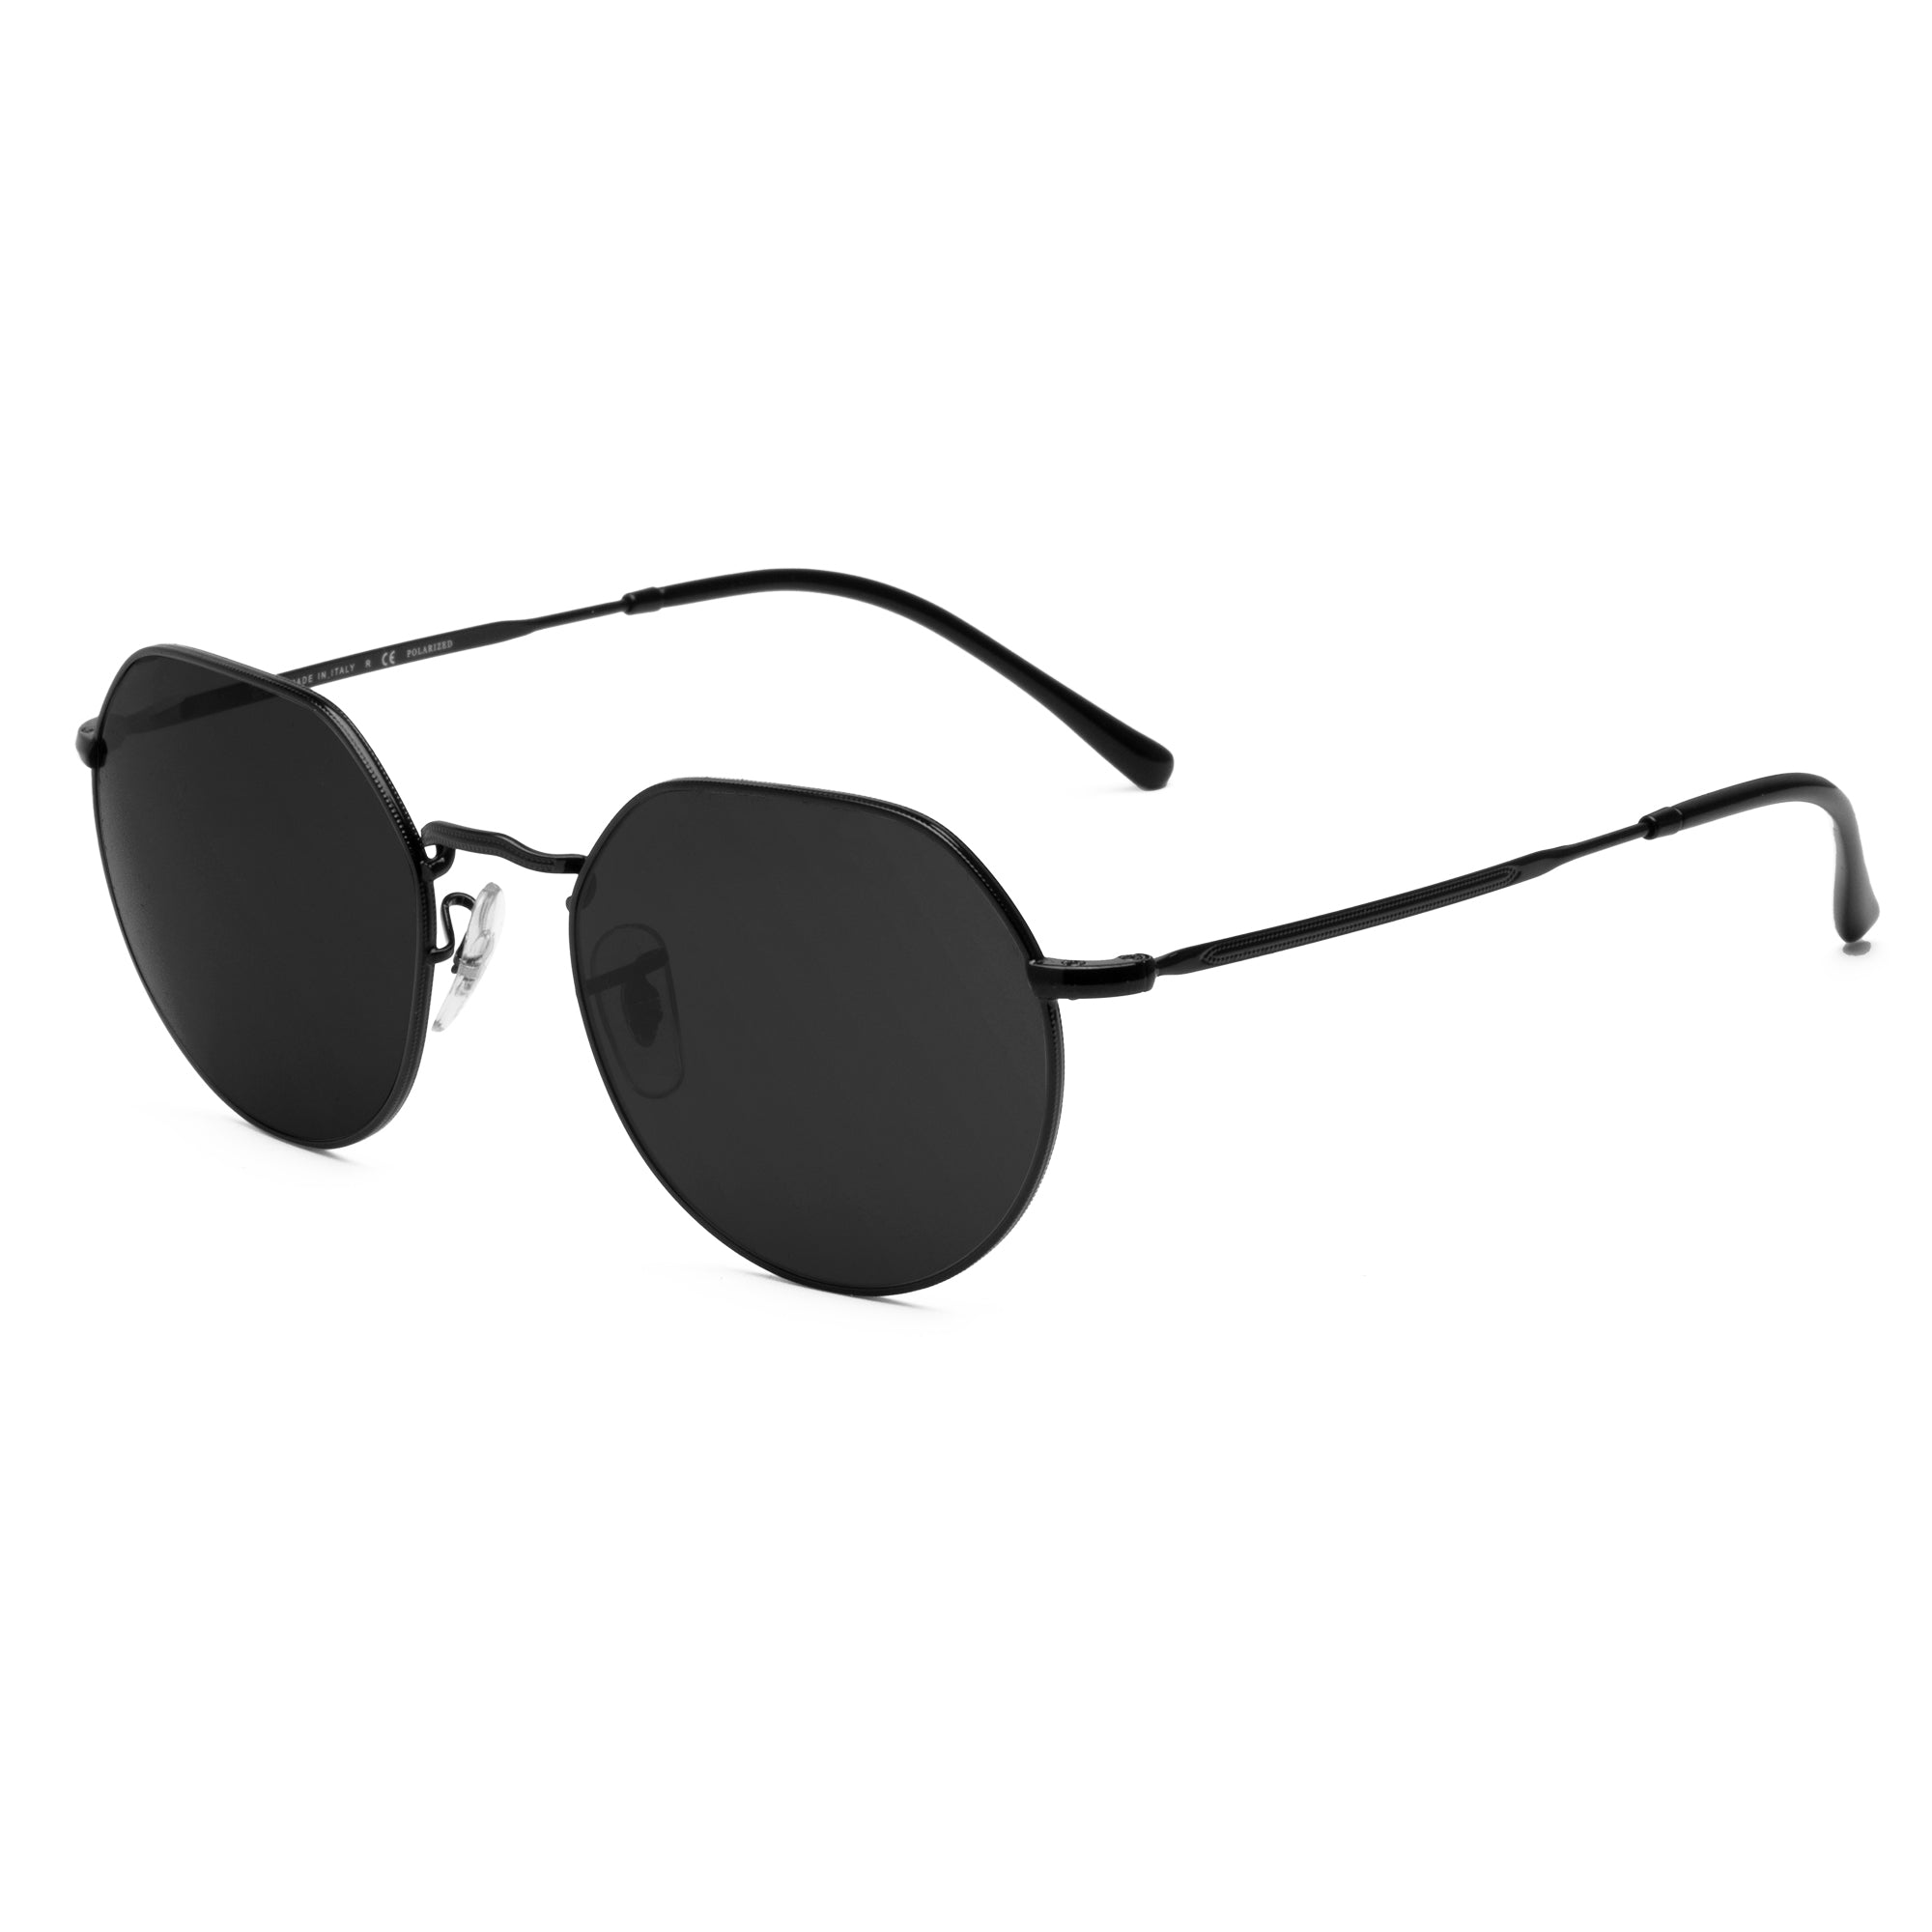 Larg Trendy Sunshade Glasses Big Frame Deep and Saturated Image Colors for  Vacation Daily Wear Car Driving Black Frame Black Lens - Walmart.com